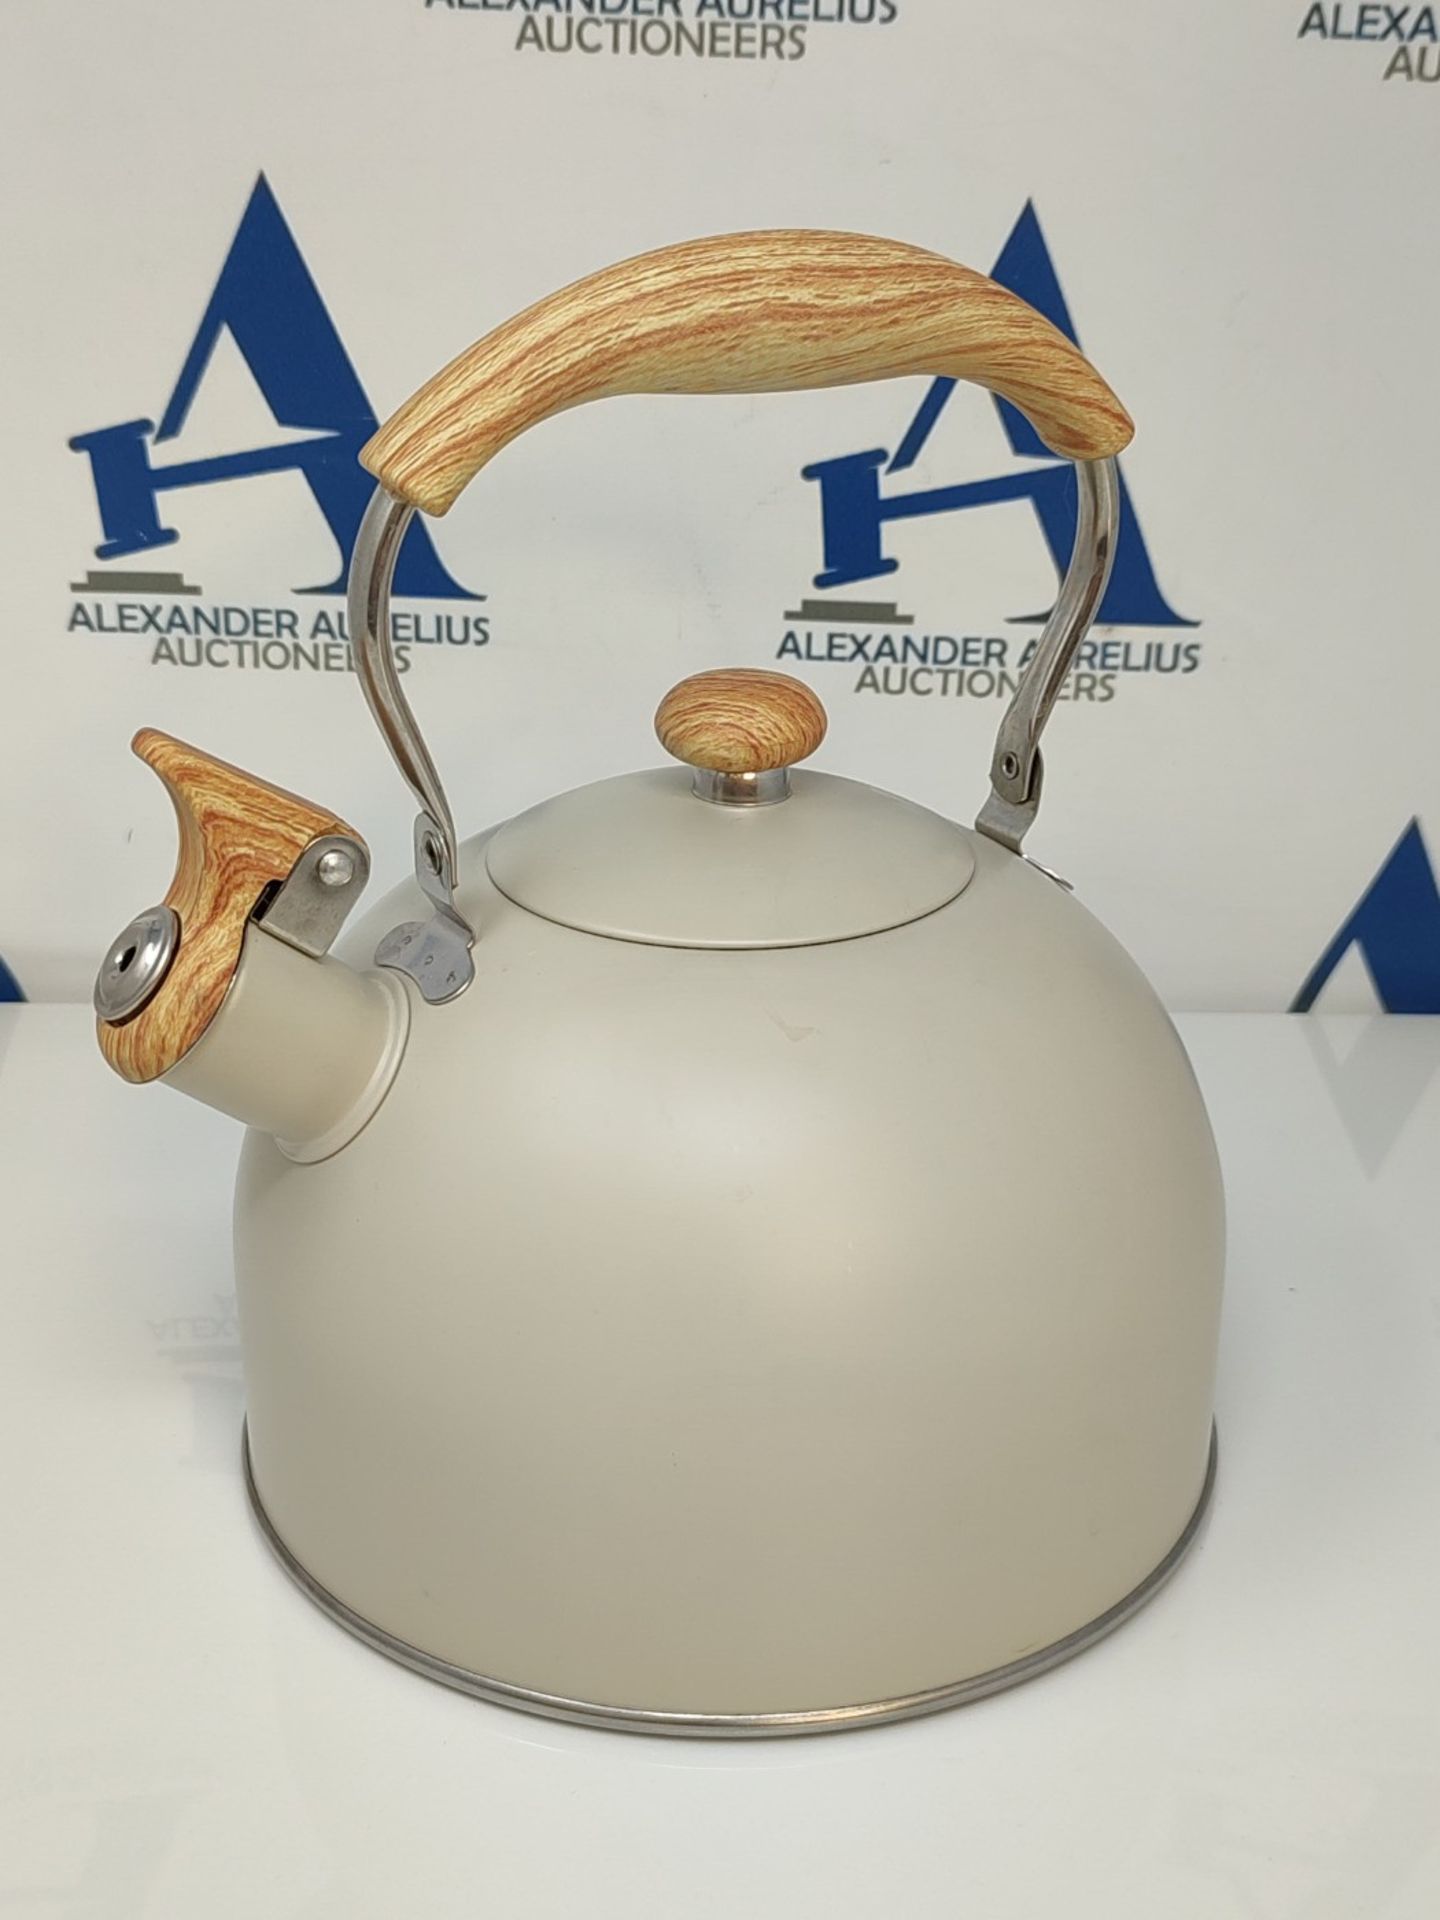 Whistling Kettle, 2.5L Stainless Steel Stove Top Whistling Tea Kettle with Wood Grain - Image 2 of 2